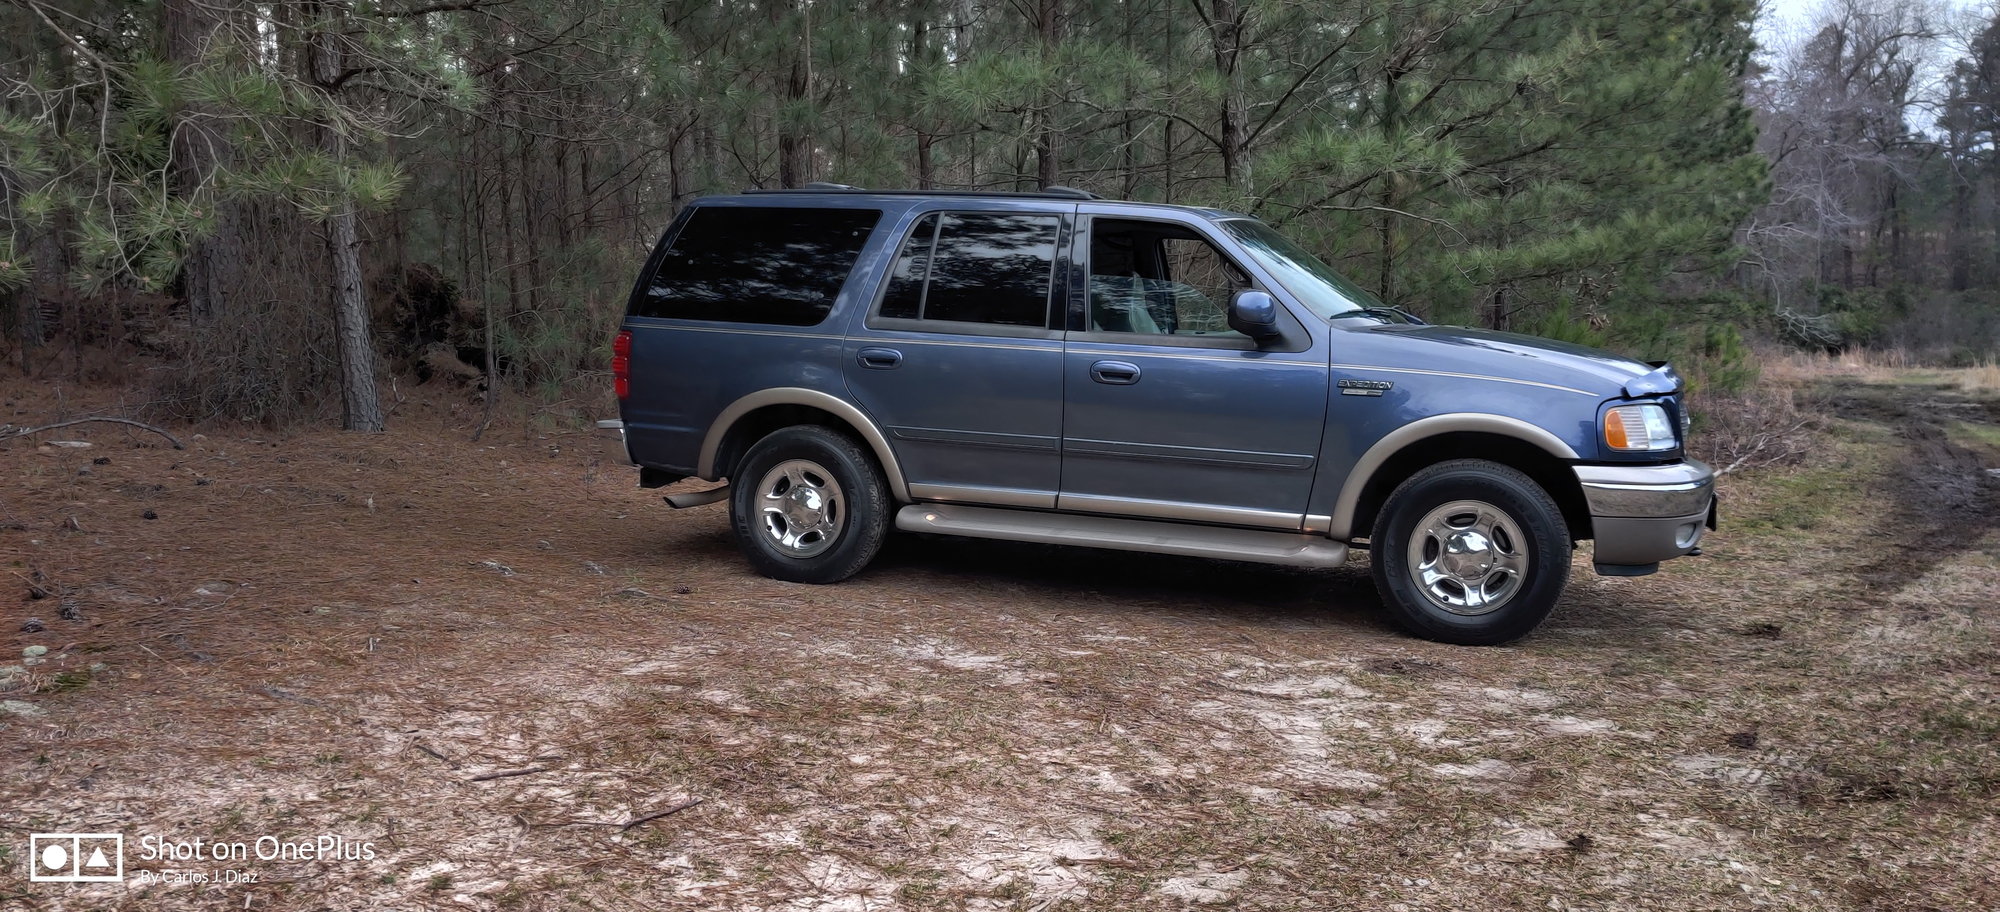 2001 Expedition 4x4 towing capability? - F150online Forums 2001 Ford Expedition 5.4 Towing Capacity